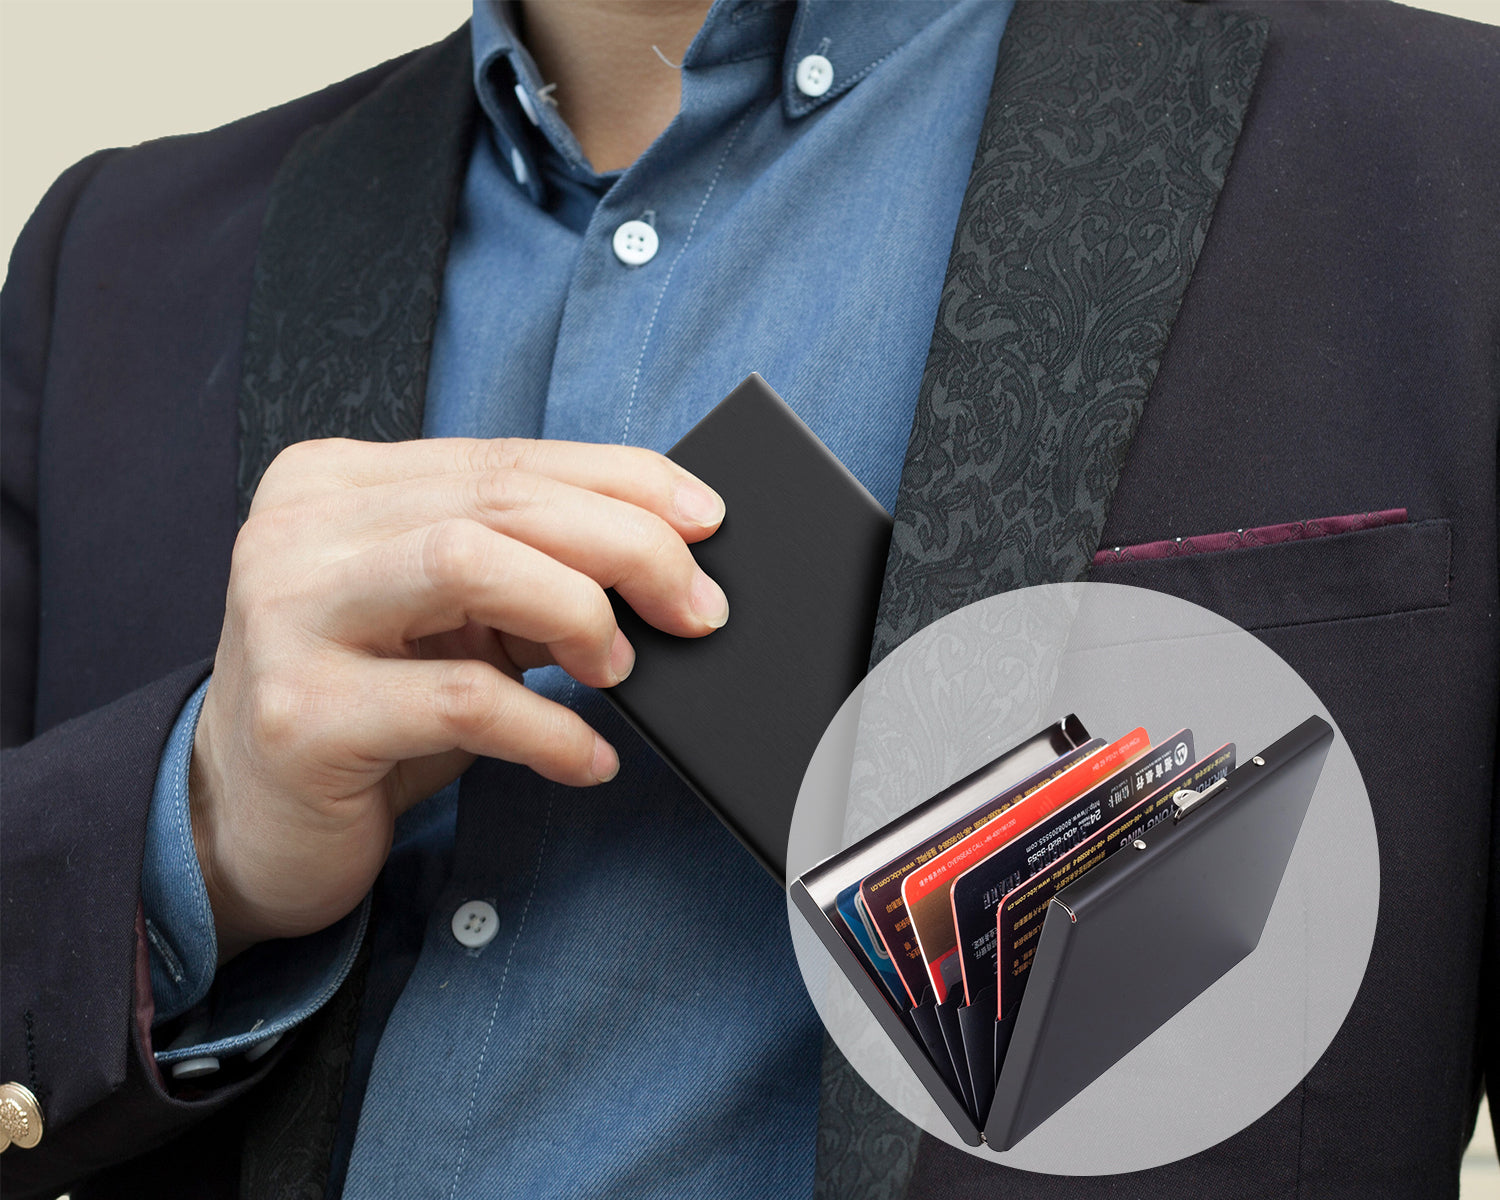 Keep your identity safe with RFID protector